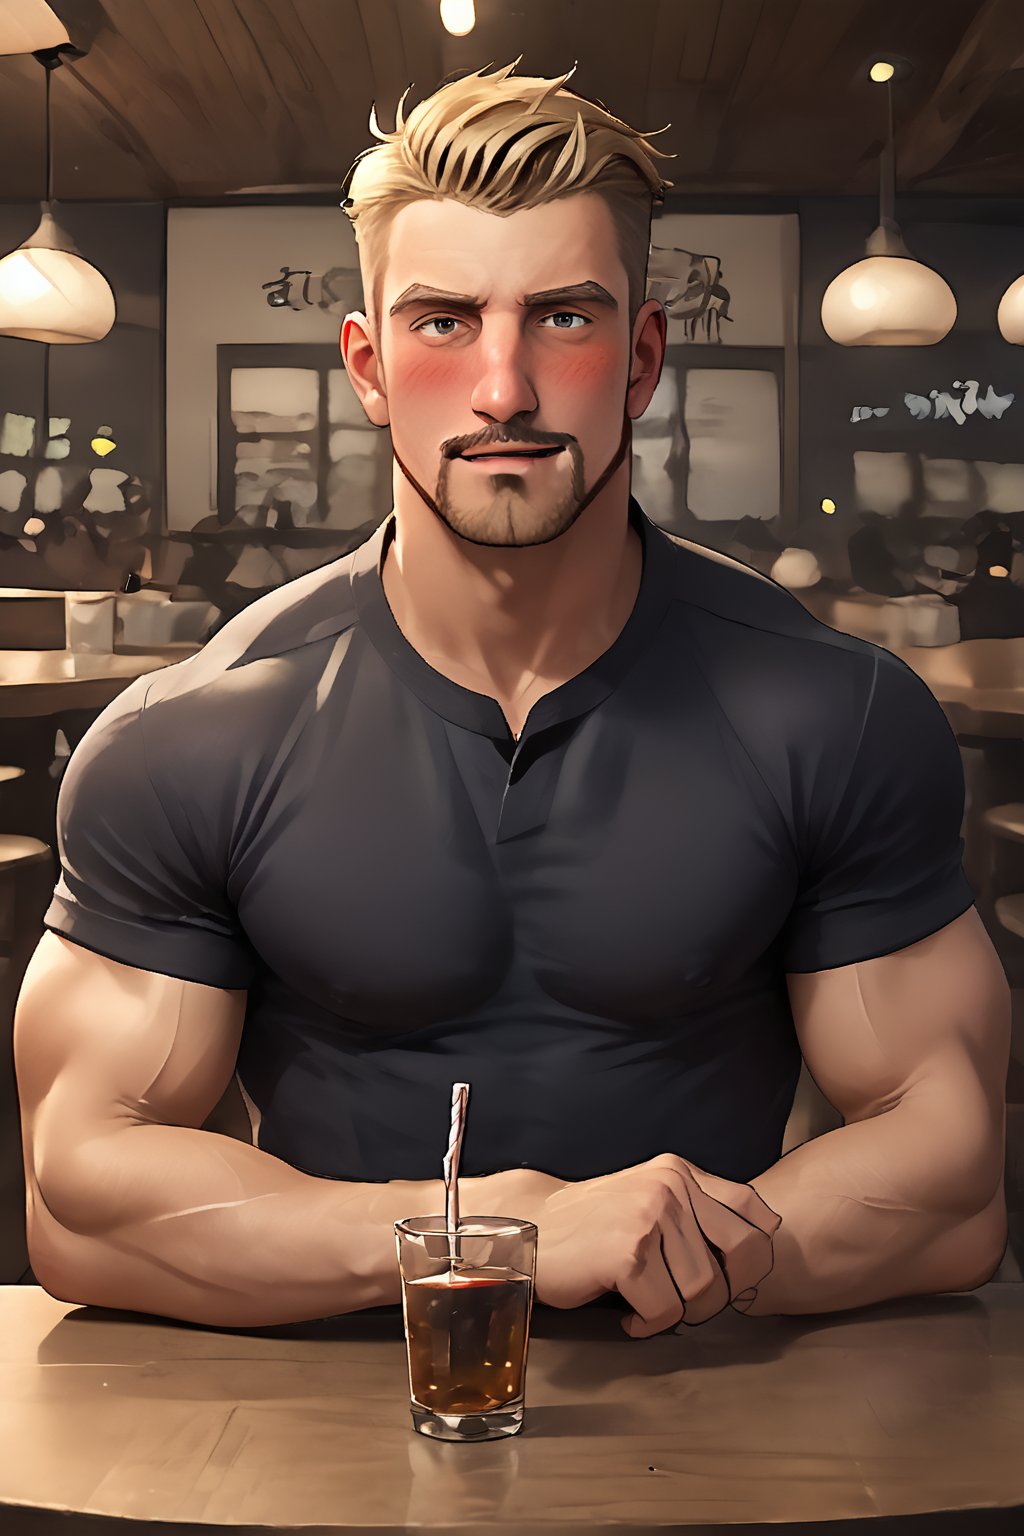 SCORE_9, SCORE_8_UP, 1BOY, MATURE MALE, FORMALWEAR, SHIRT, AT TABLE IN RESTAURANT, DRINK, BLUSHES, DRUNK, MUSCULAR, SHORT HAIR, CHEERS, YATTA NE!, DROOLING FOR FUN, HANDSOME, INTRICATE EYES, MANLY MALE, 3D, CEL-SHADING, SOURCE_ANIME, RATING_QUESTIONABLE, ,r0bbi3r0bbi3